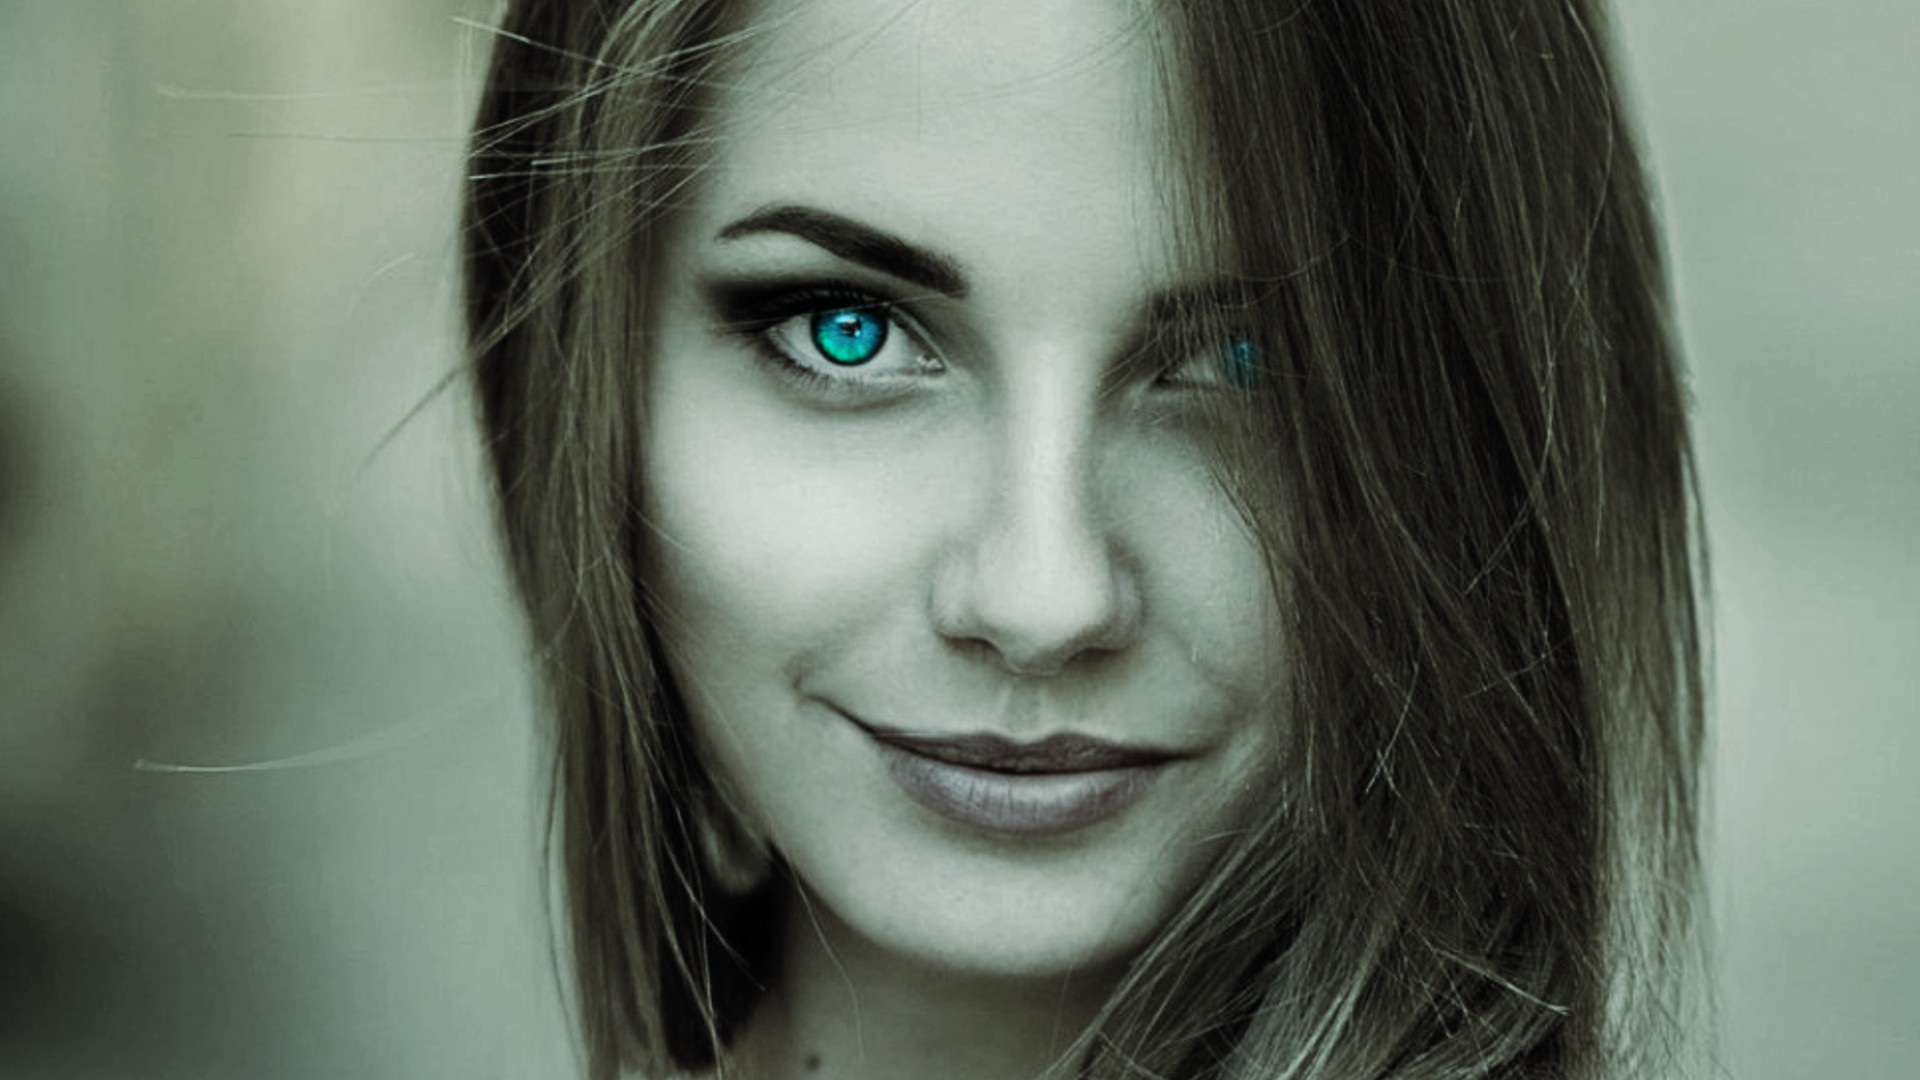 Face Women Smiling Selective Coloring Turquoise Eyes Brunette Closeup 1920x1080